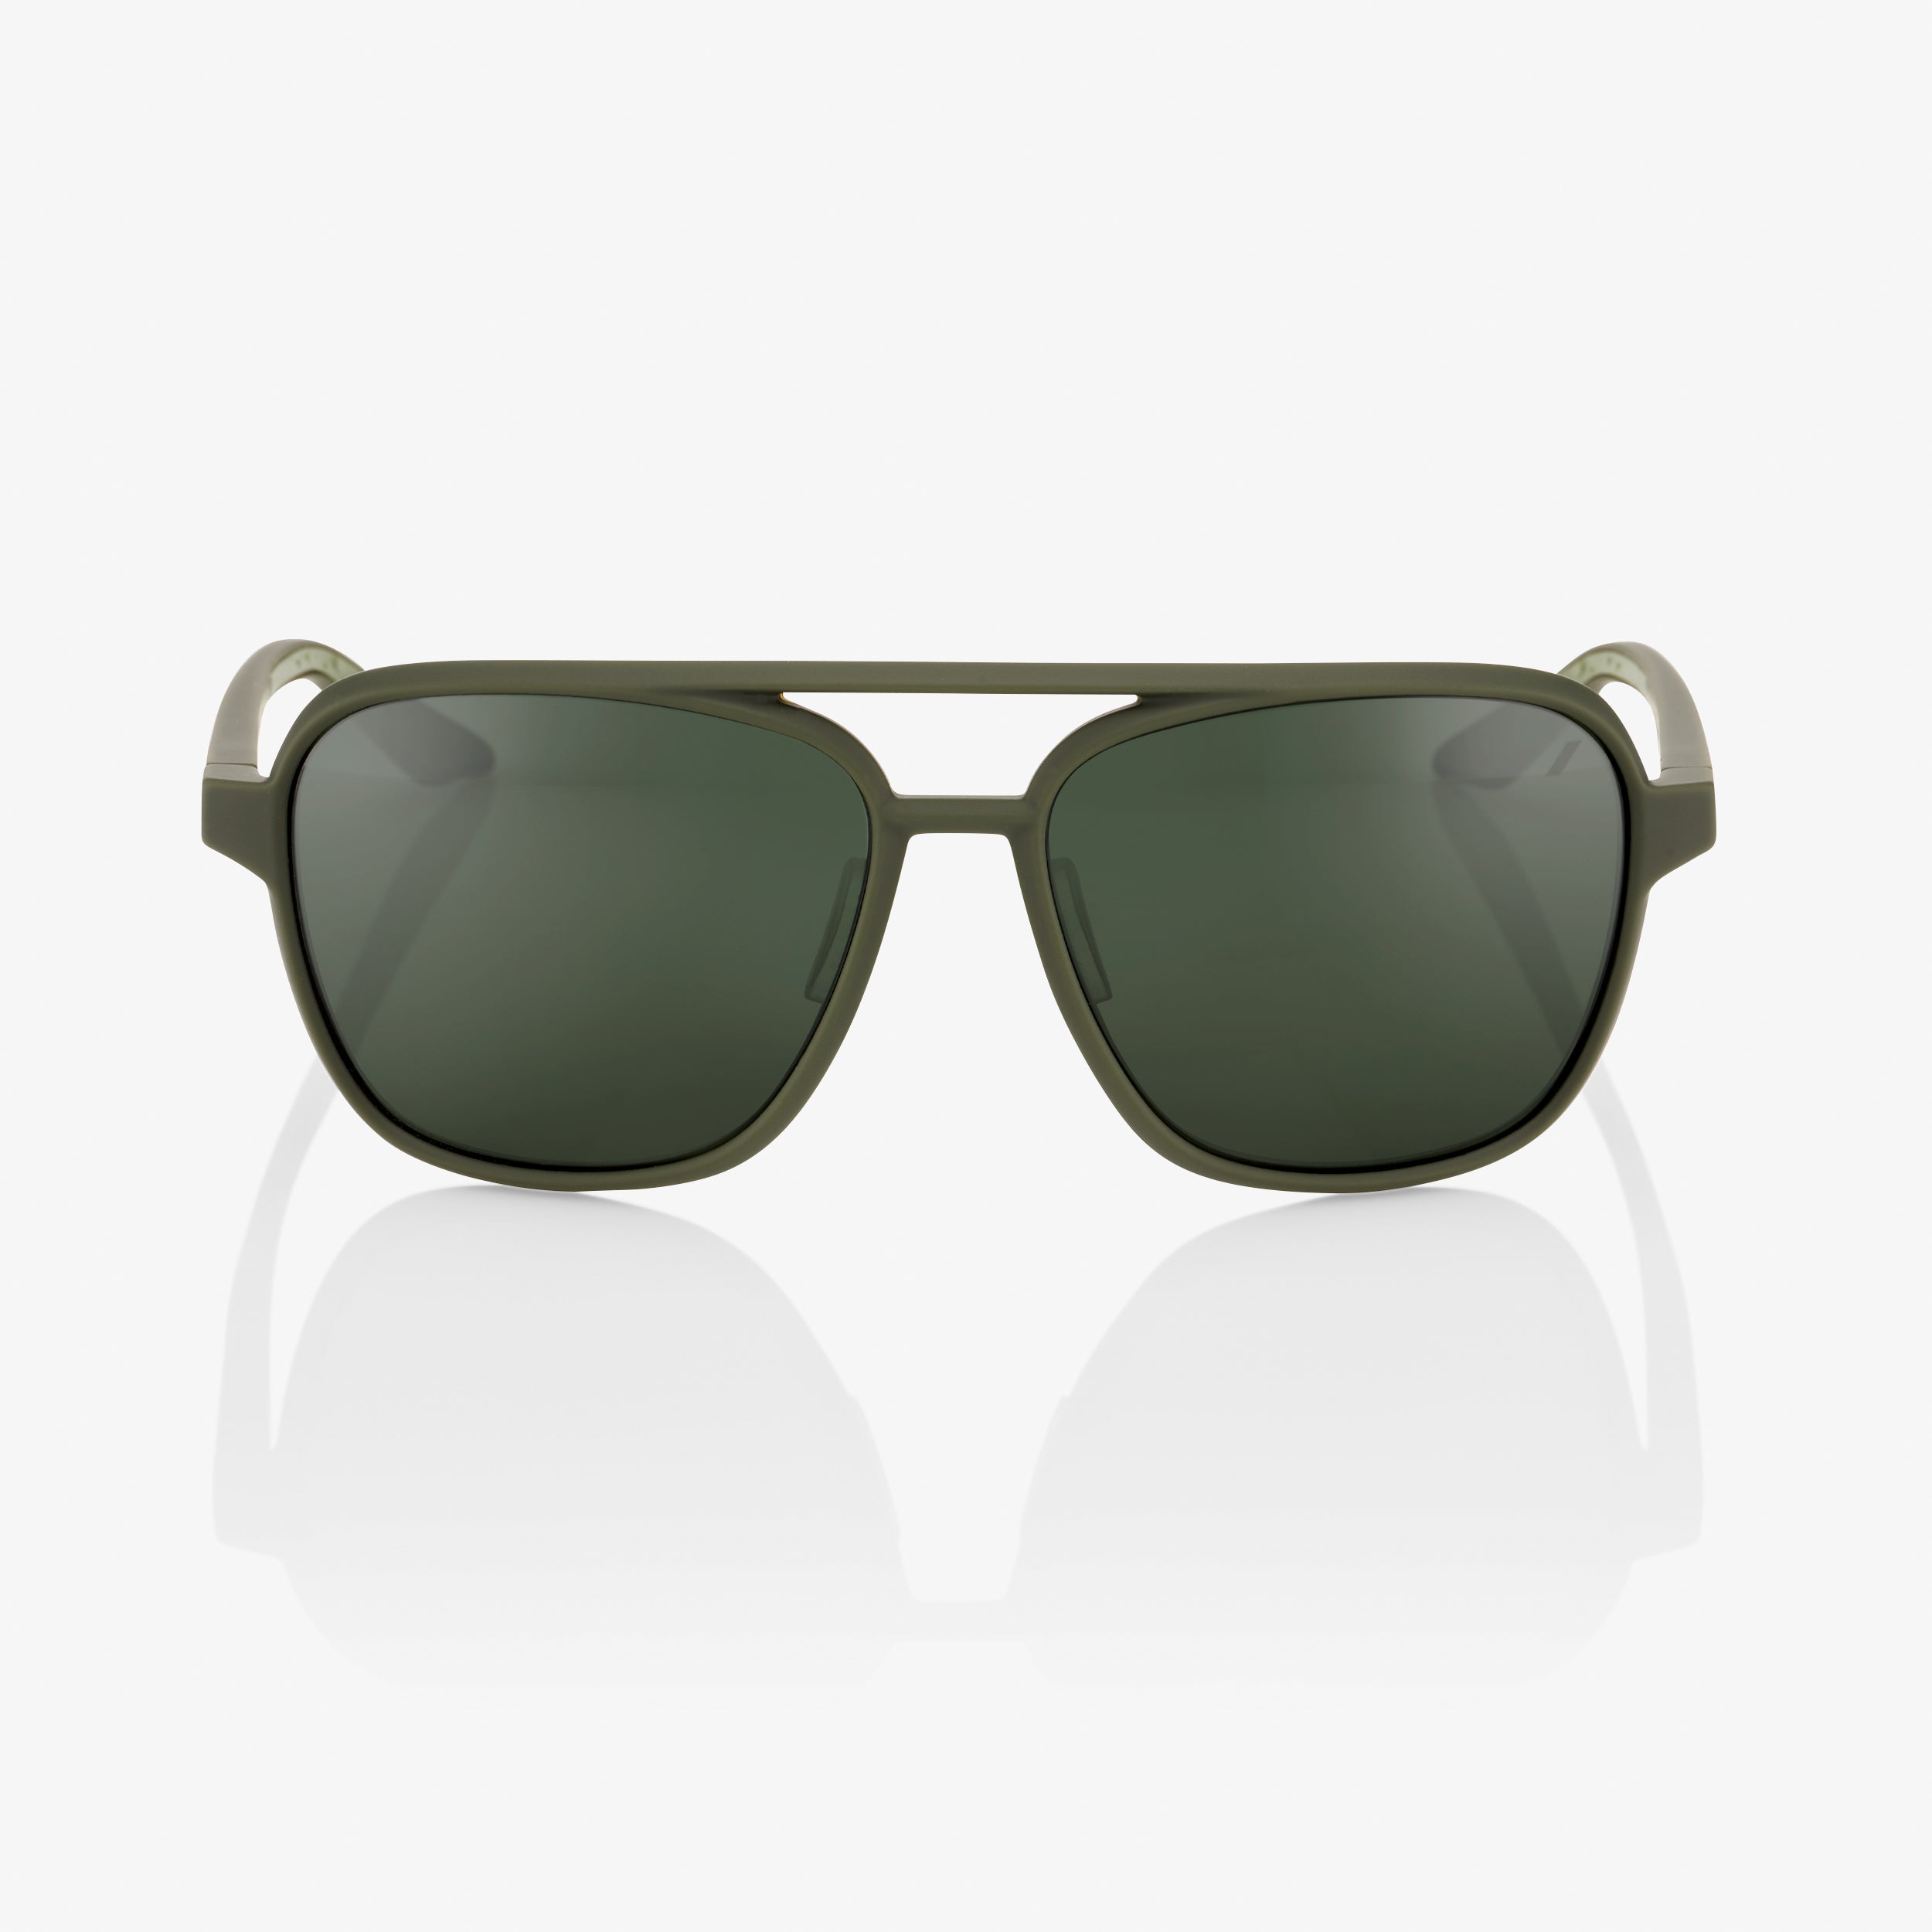 KASIA - Soft Tact Army Green - Grey Green Lens - Secondary